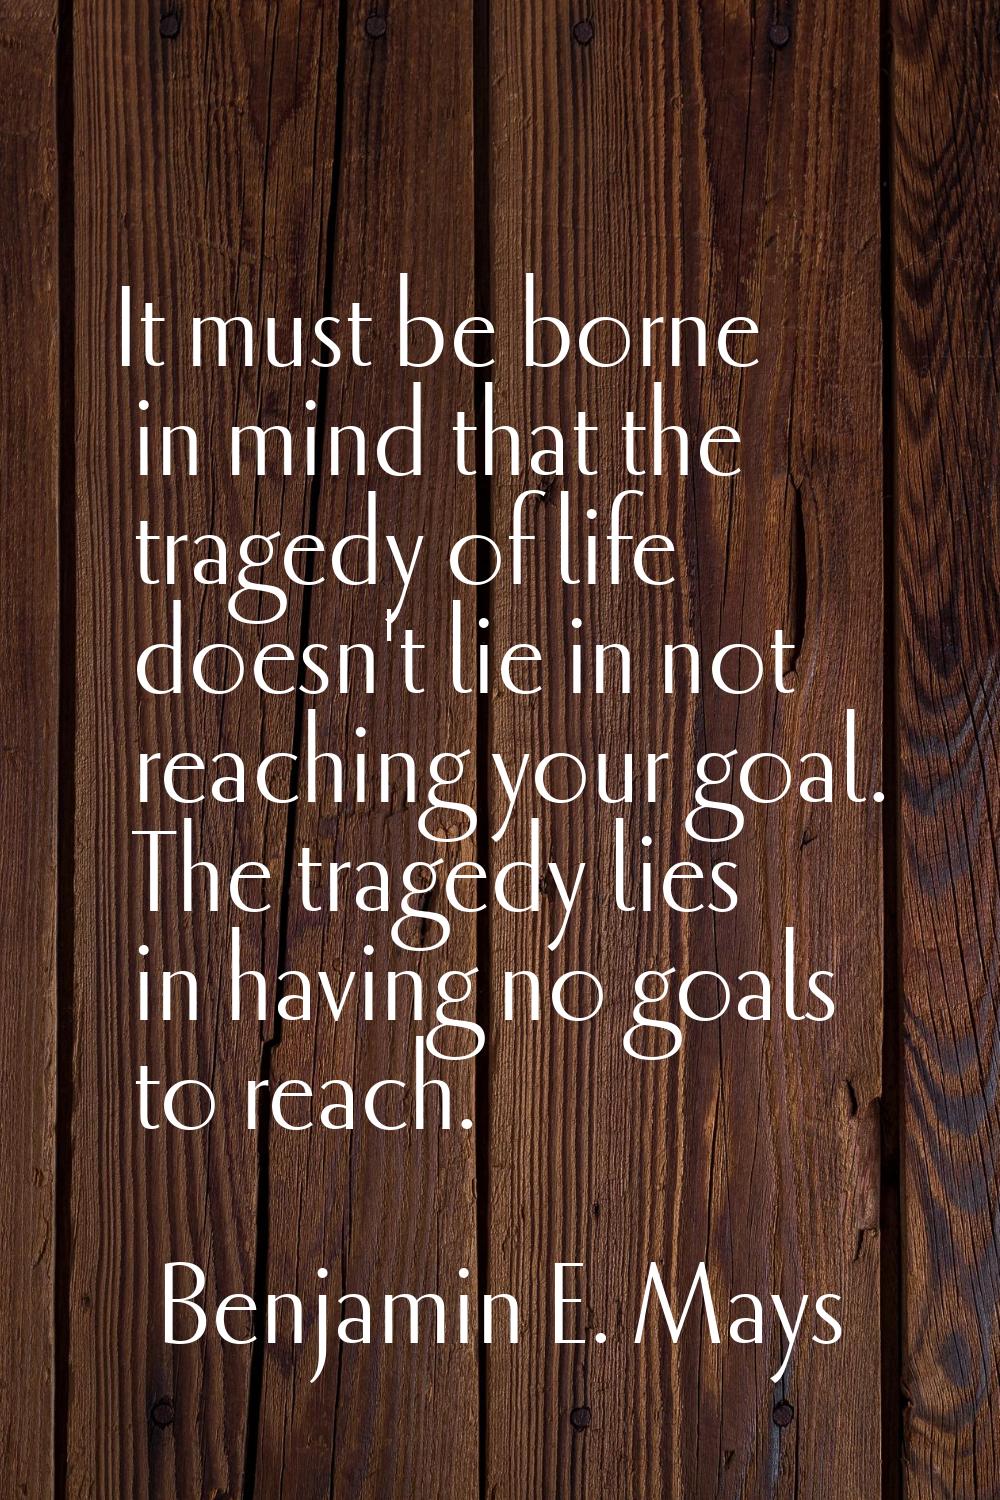 It must be borne in mind that the tragedy of life doesn't lie in not reaching your goal. The traged